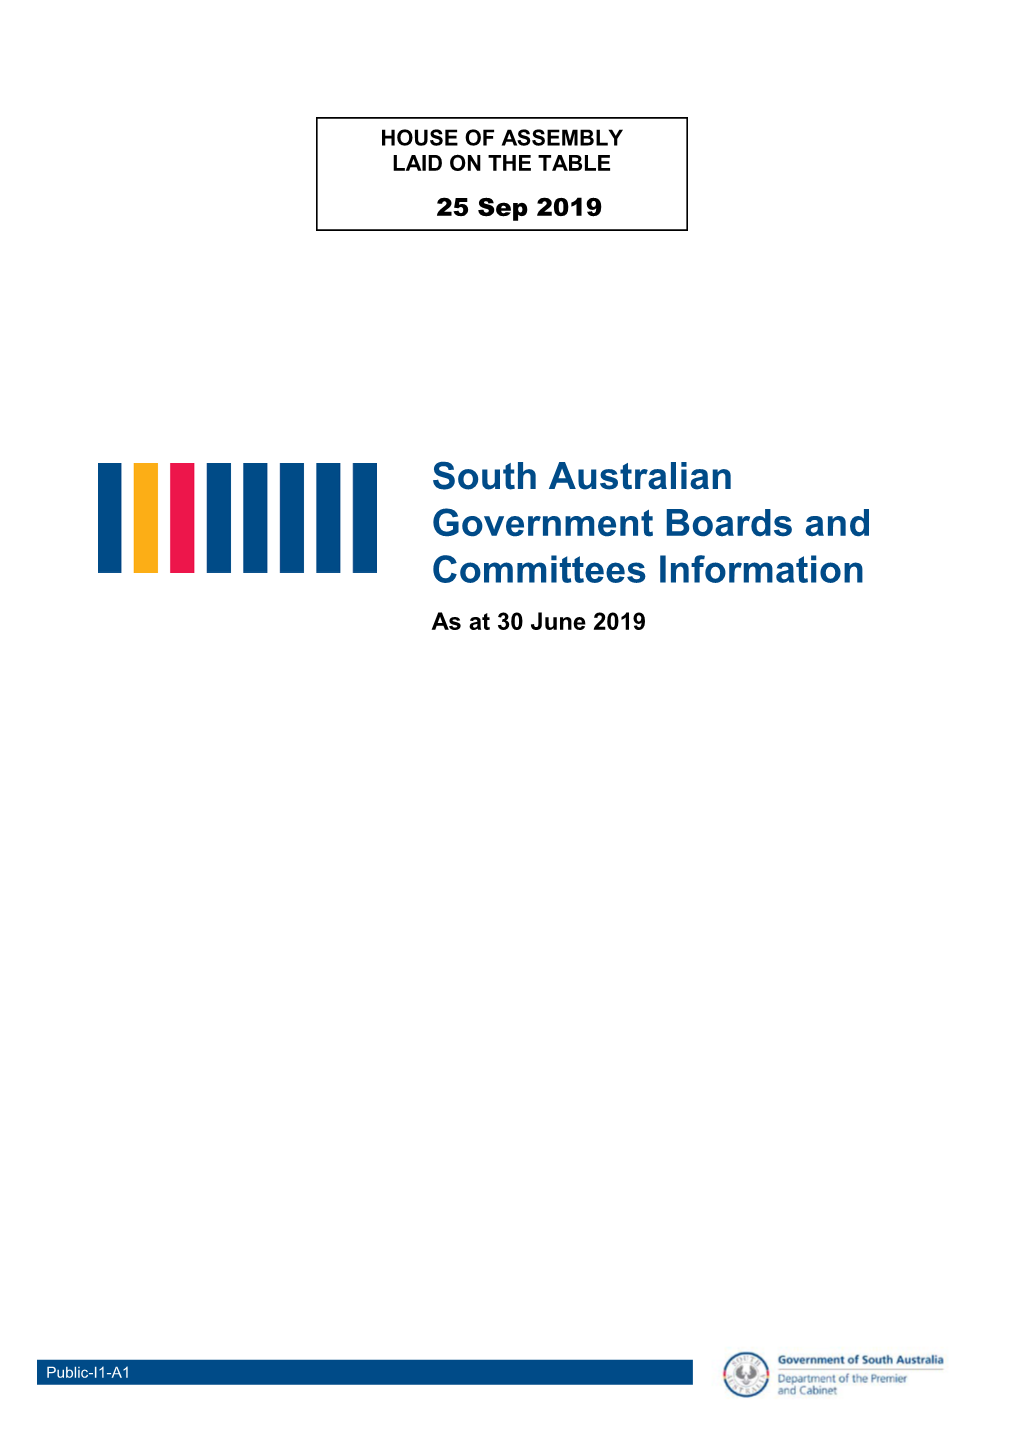 South Australian Government Boards and Committees Information As at 30 June 2019